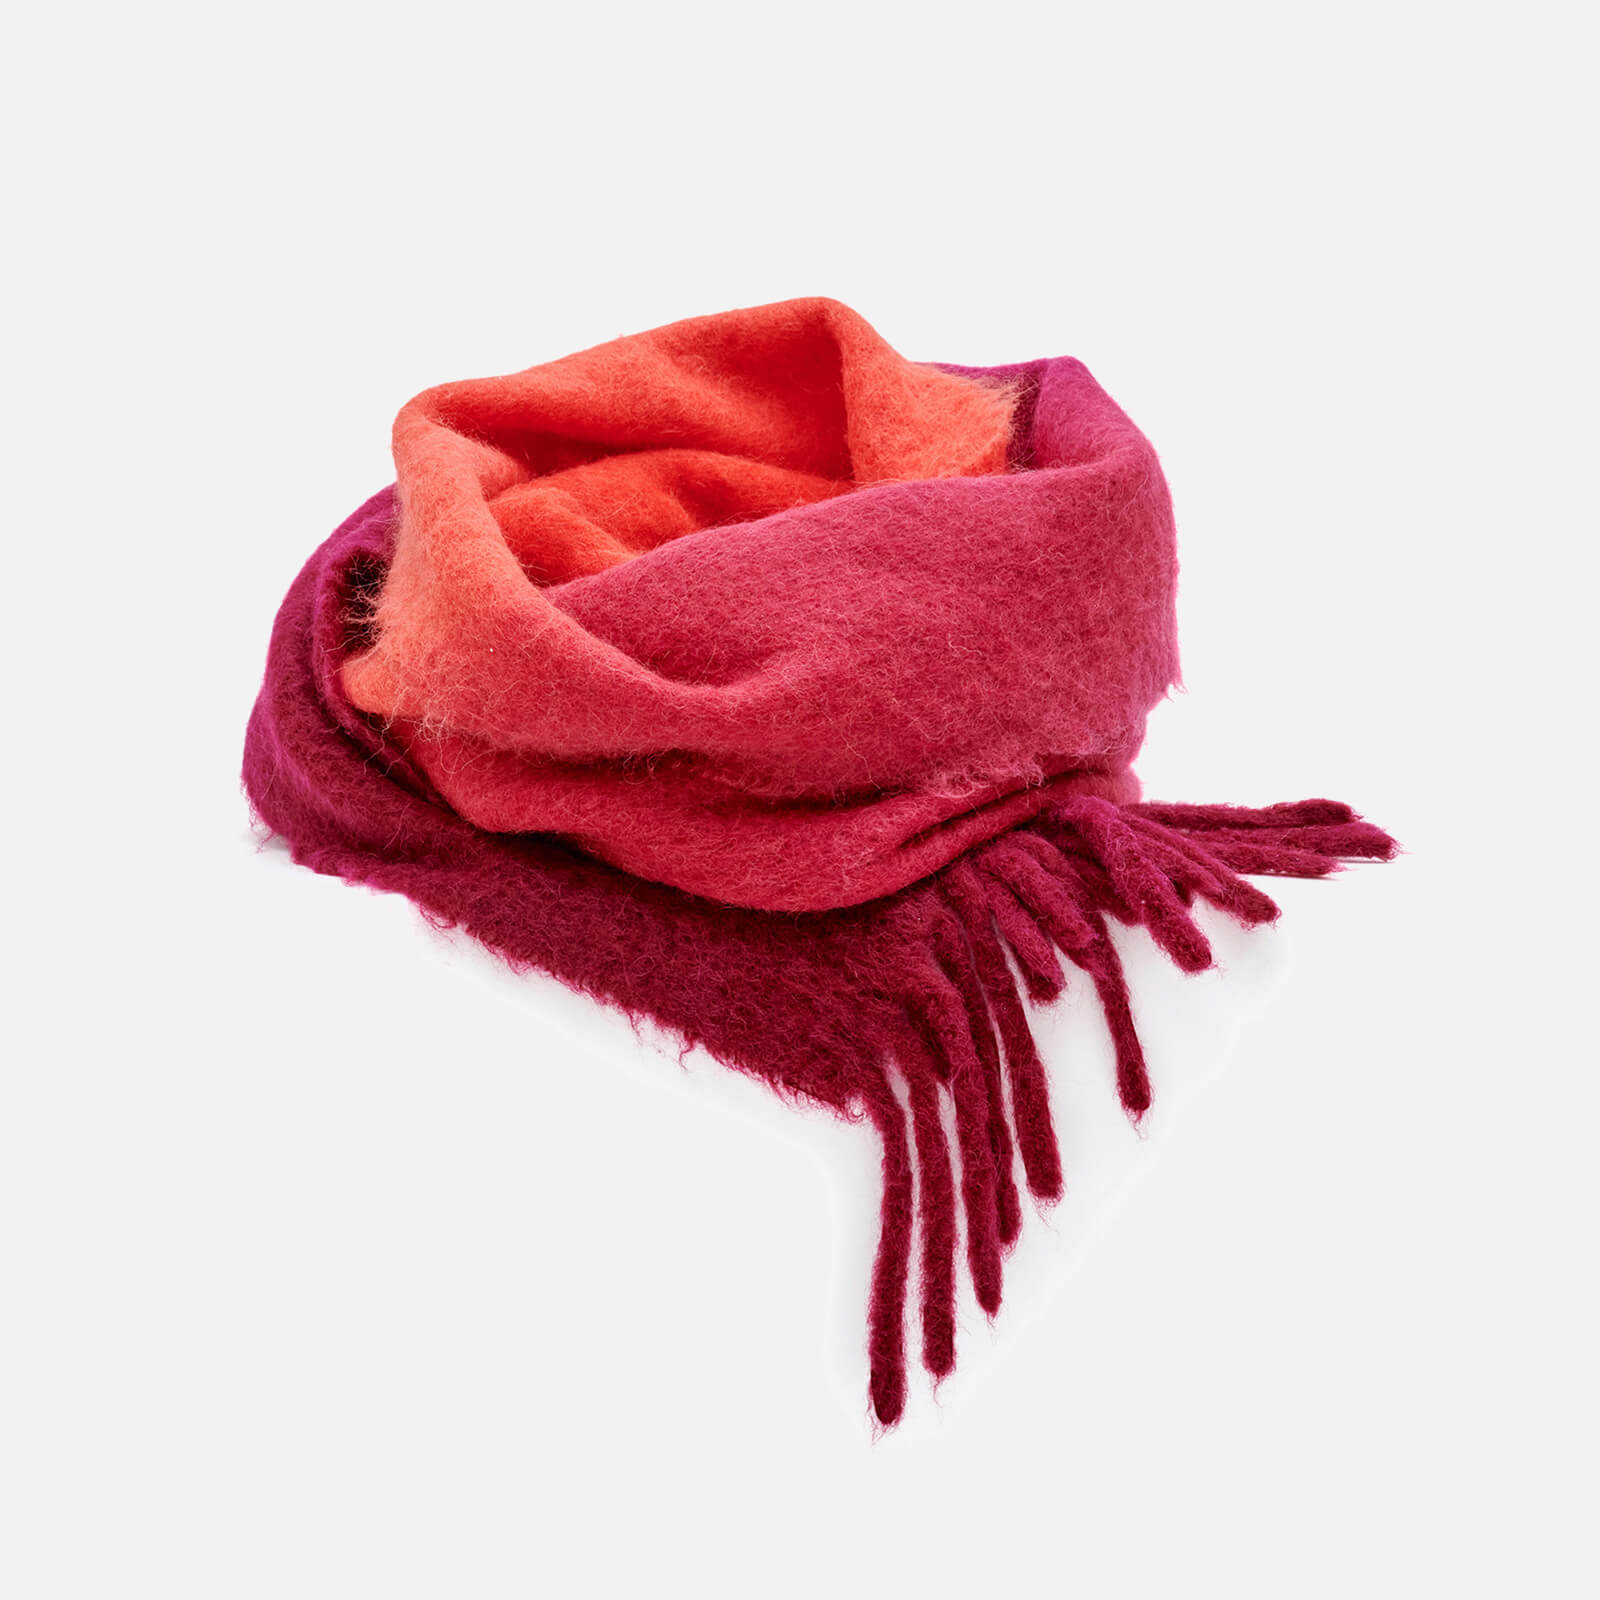 Isabel Marant Women's Firna Scarf - Red/Pink